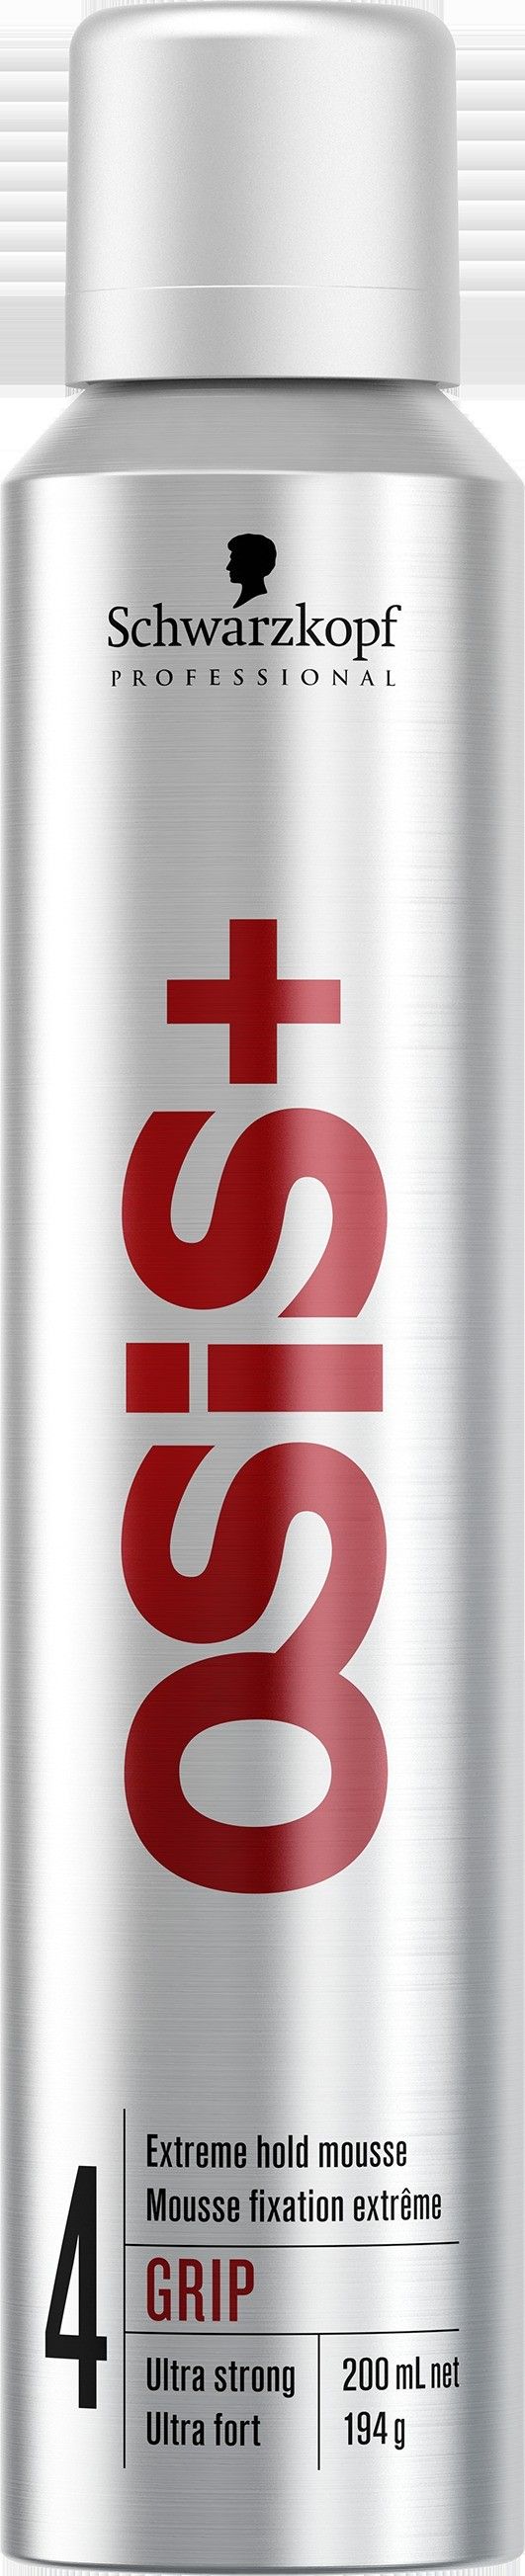 Schwarzkopf Professional OSiS+ Grip Extreme Hold Mousse